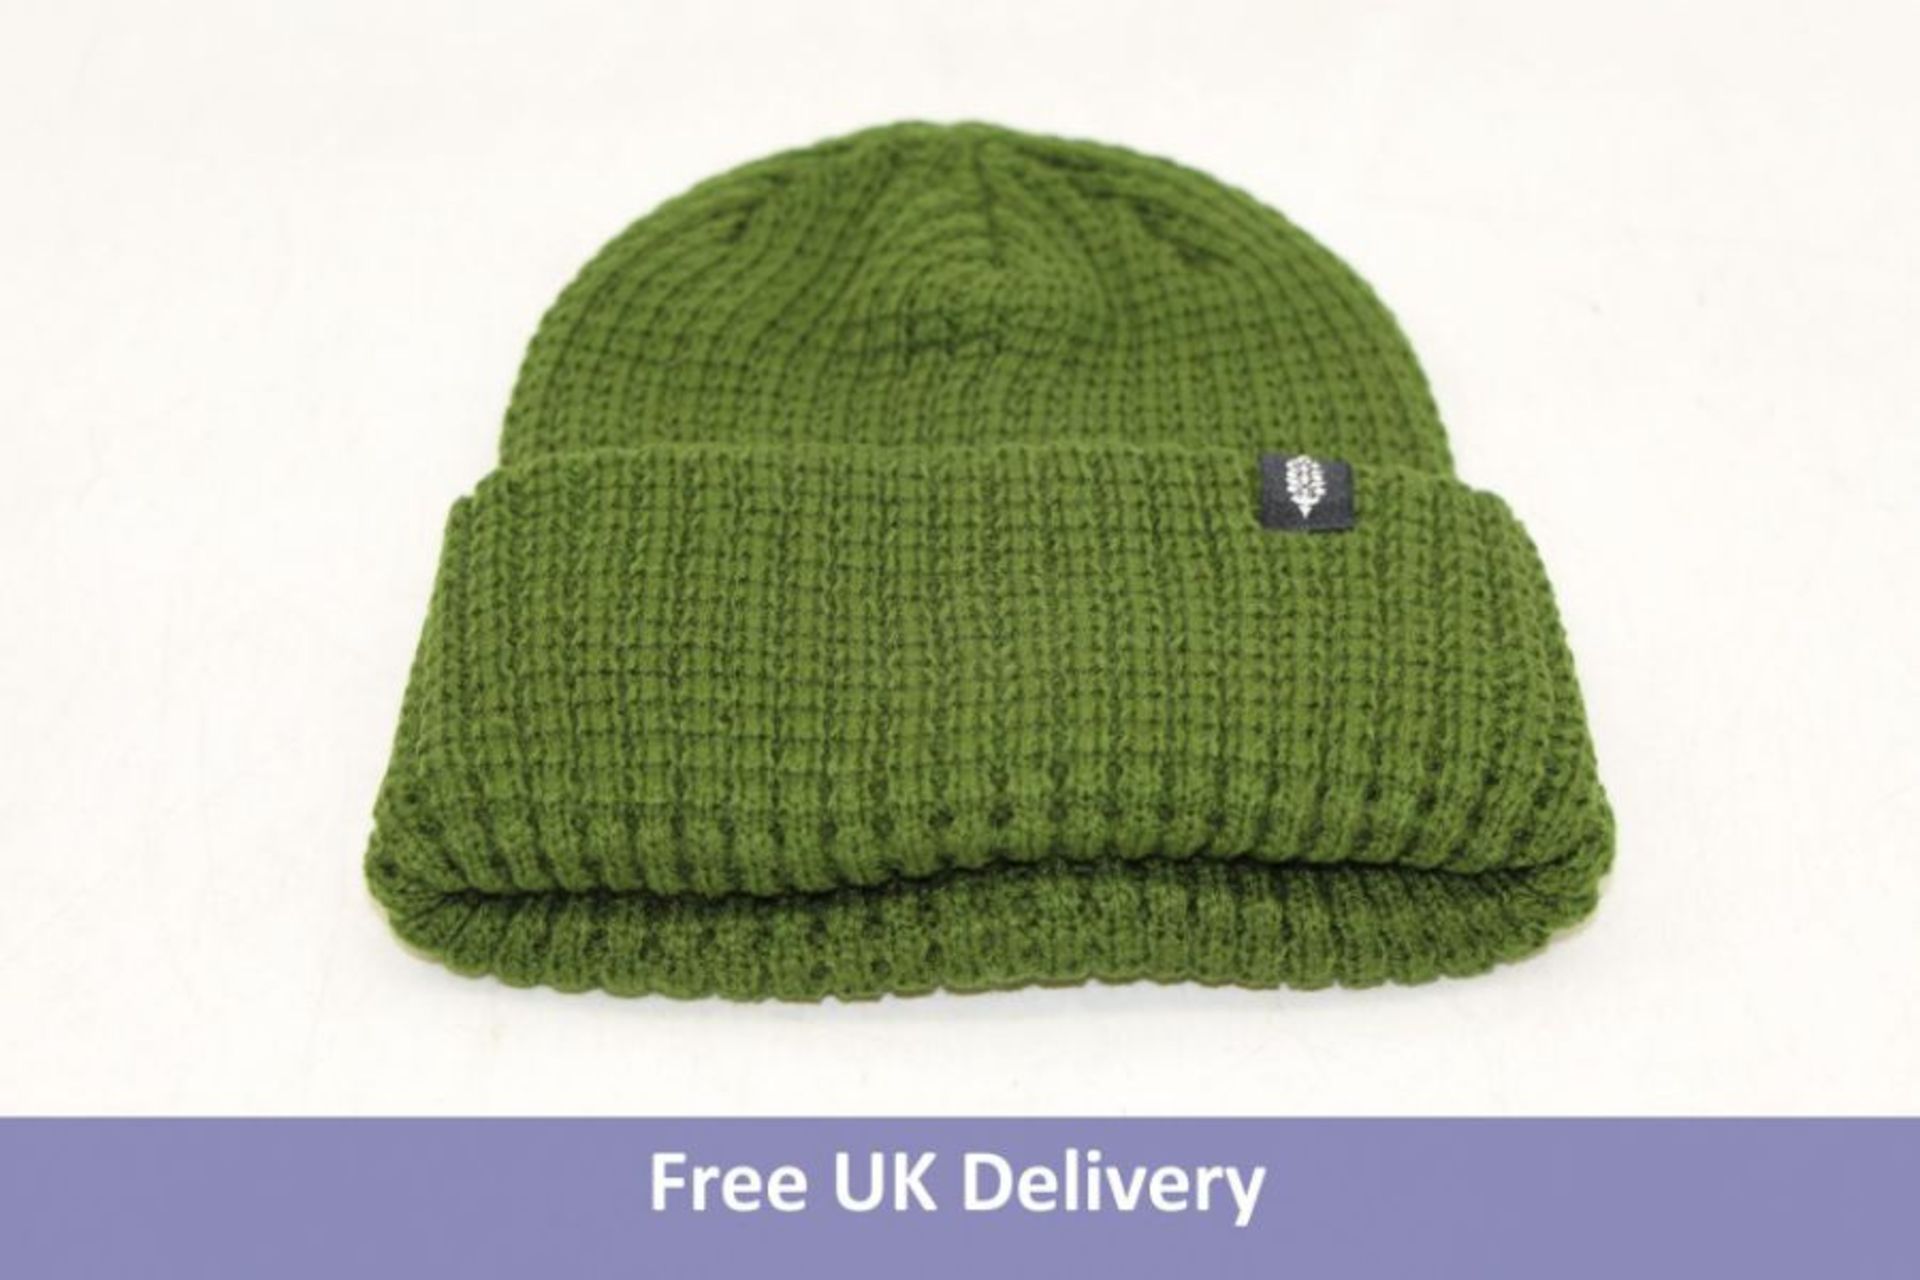 Five Free People Movement Cool Down Beanie, Green, One Size